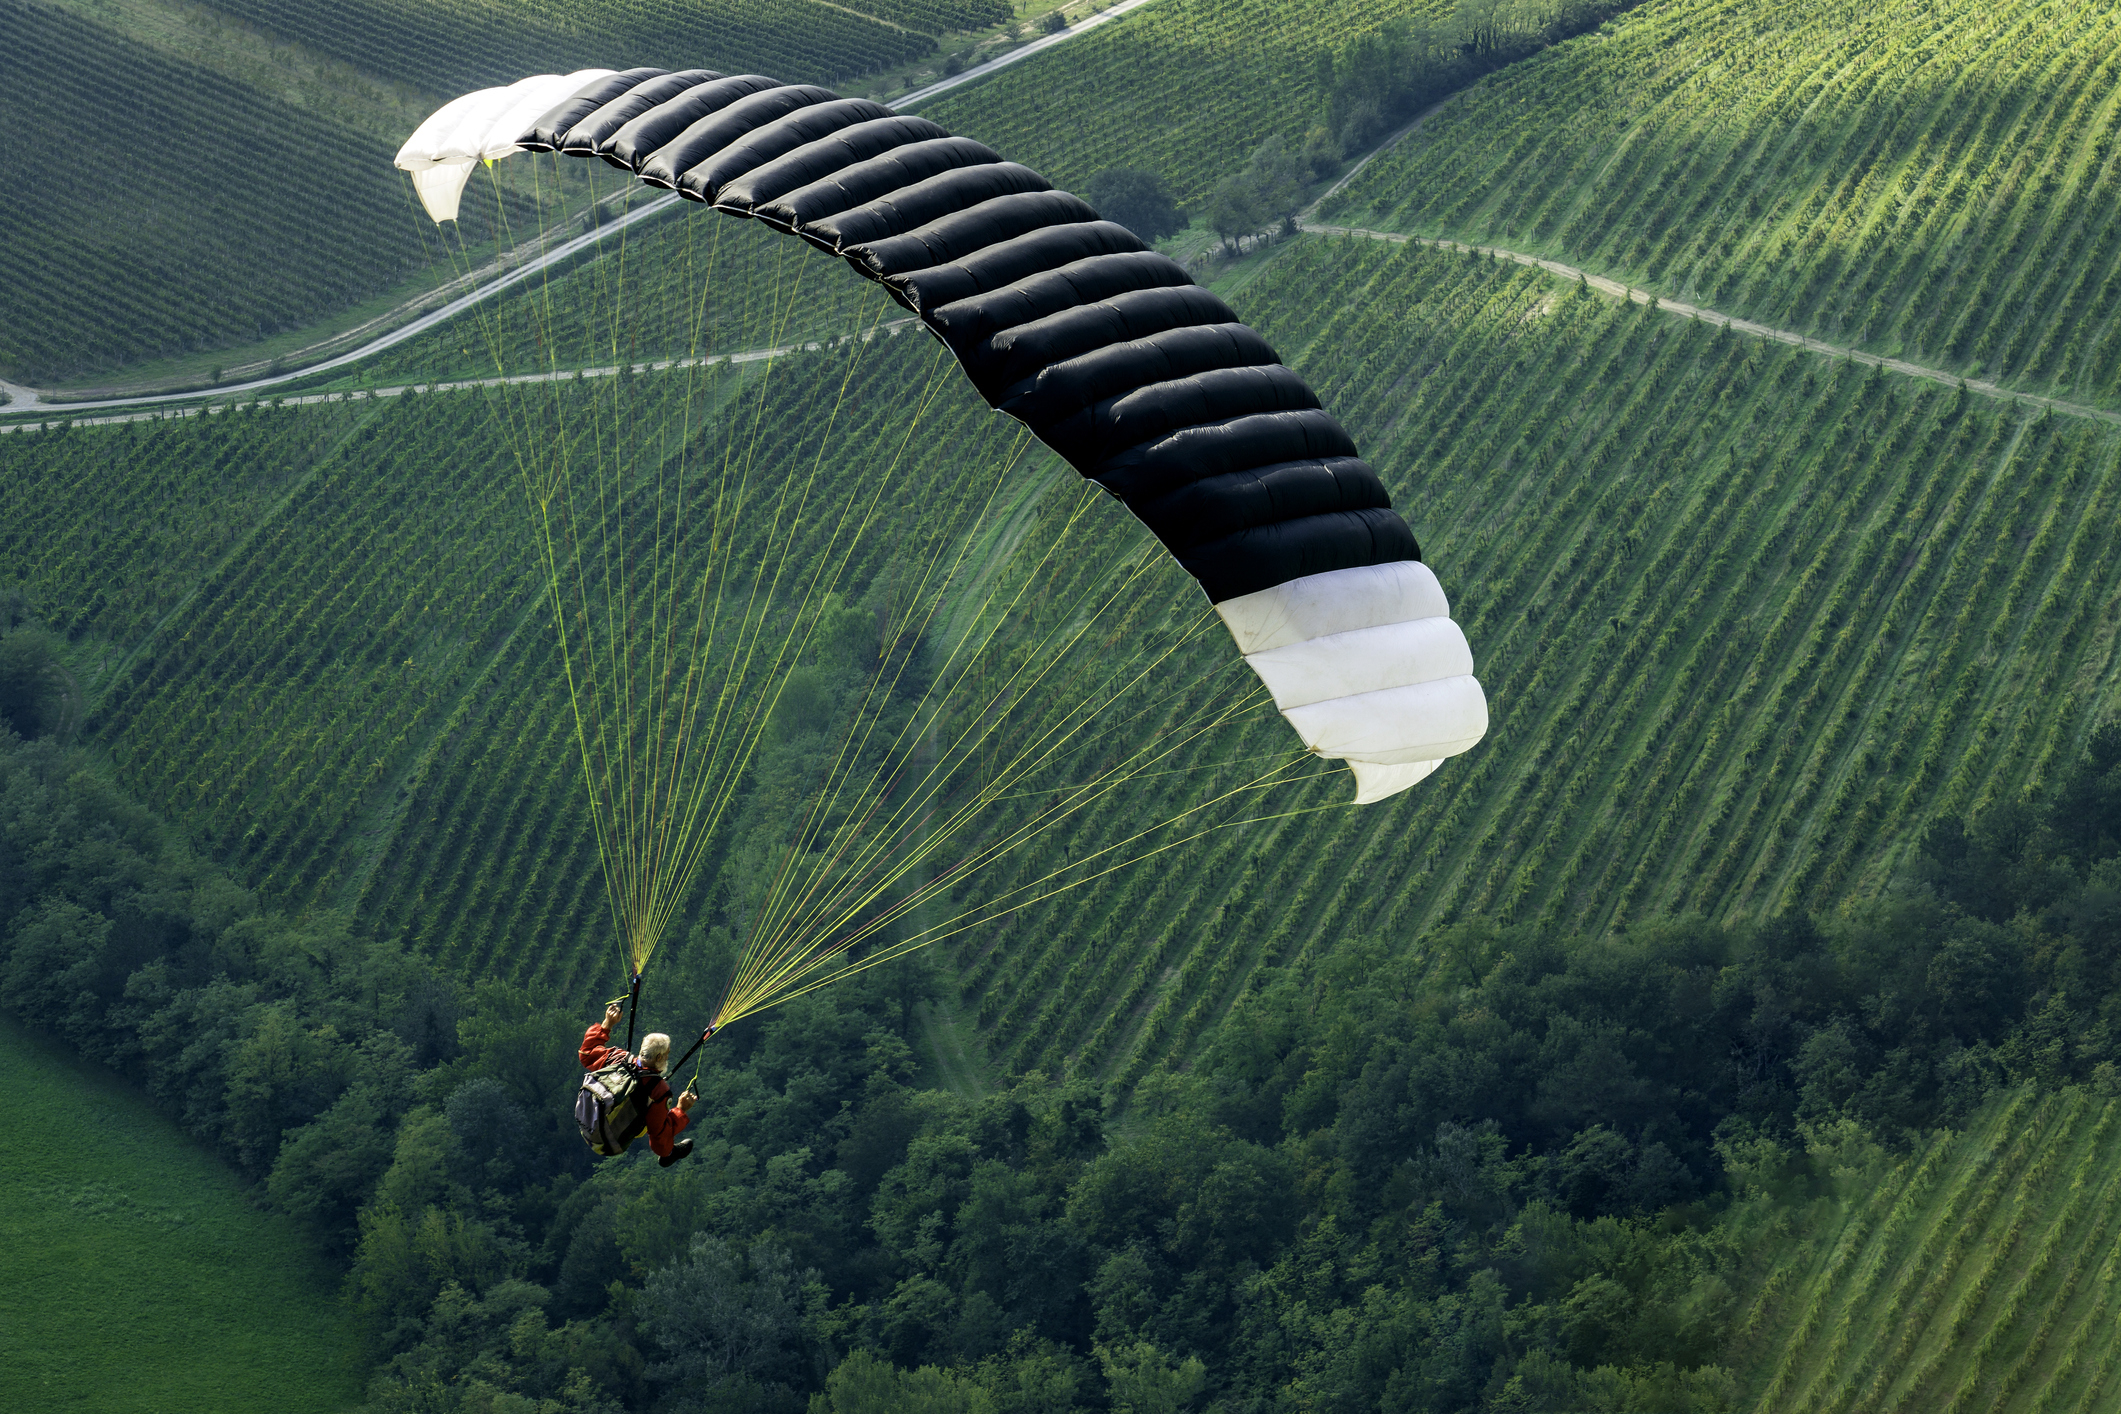 A person is paragliding